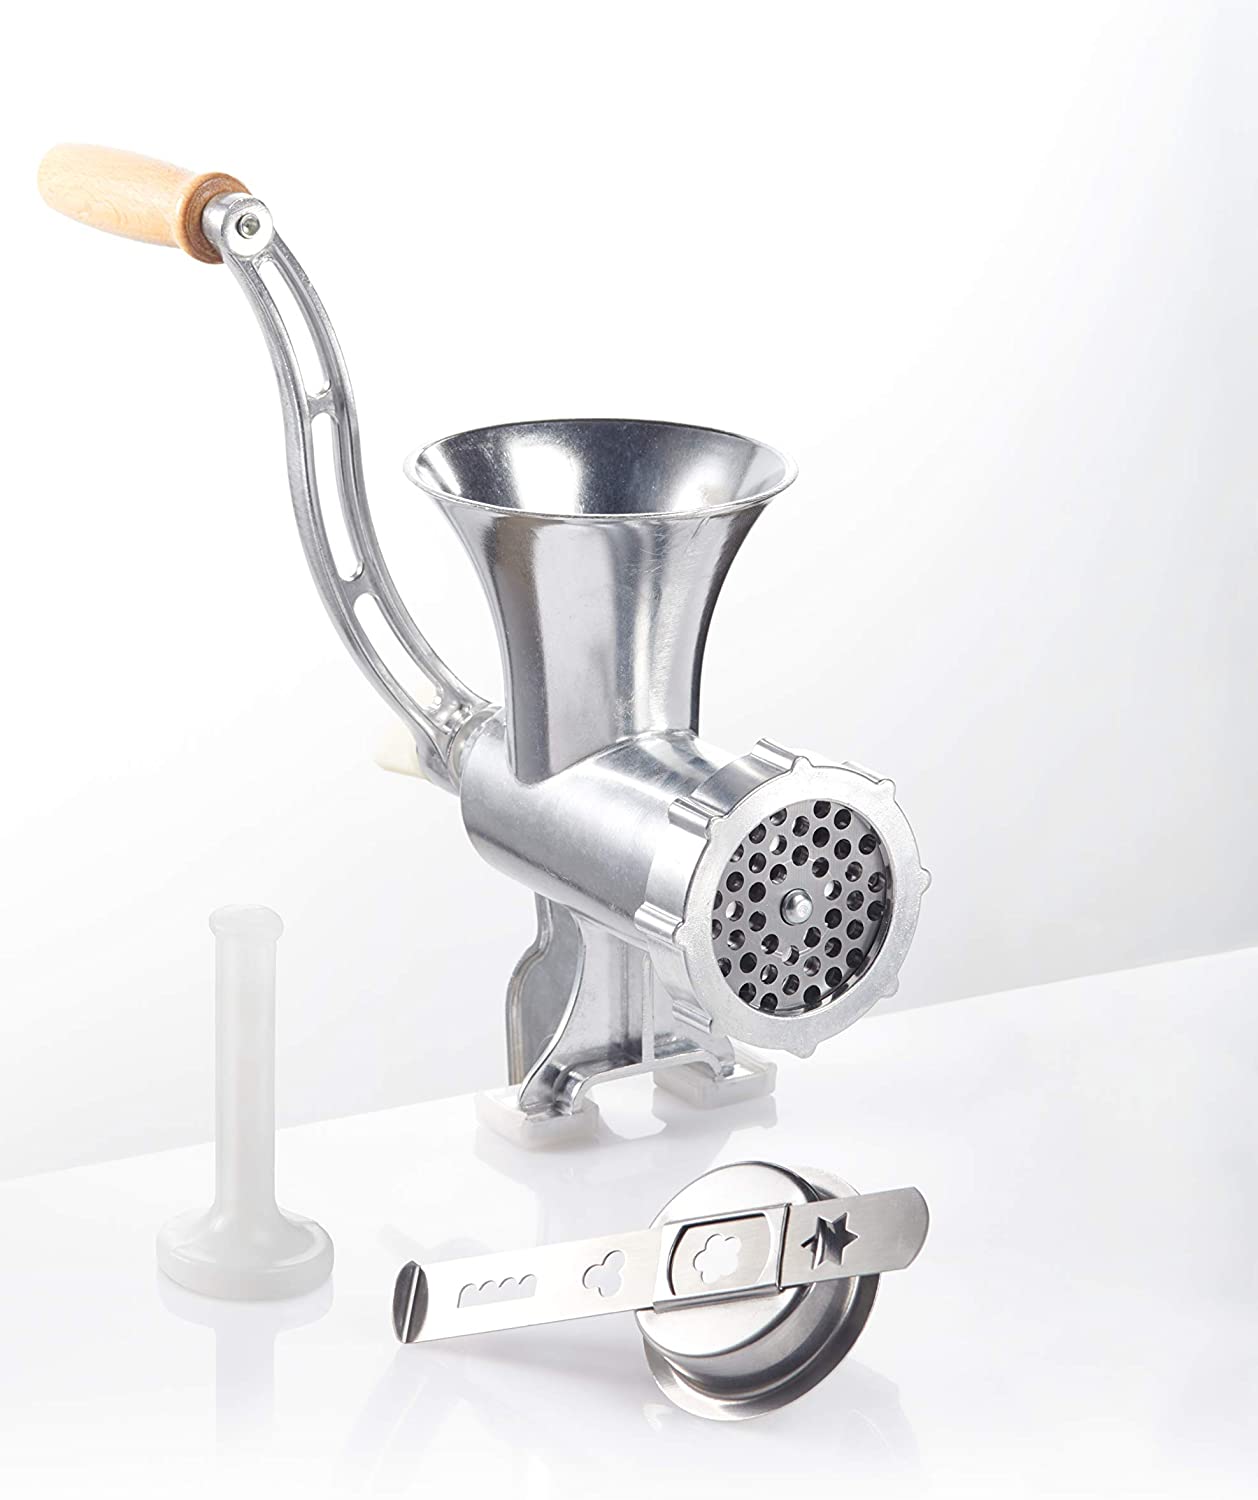 GSW 588423 Mincer Aluminium Size No. 8 with Pastry Attachment and Pestle